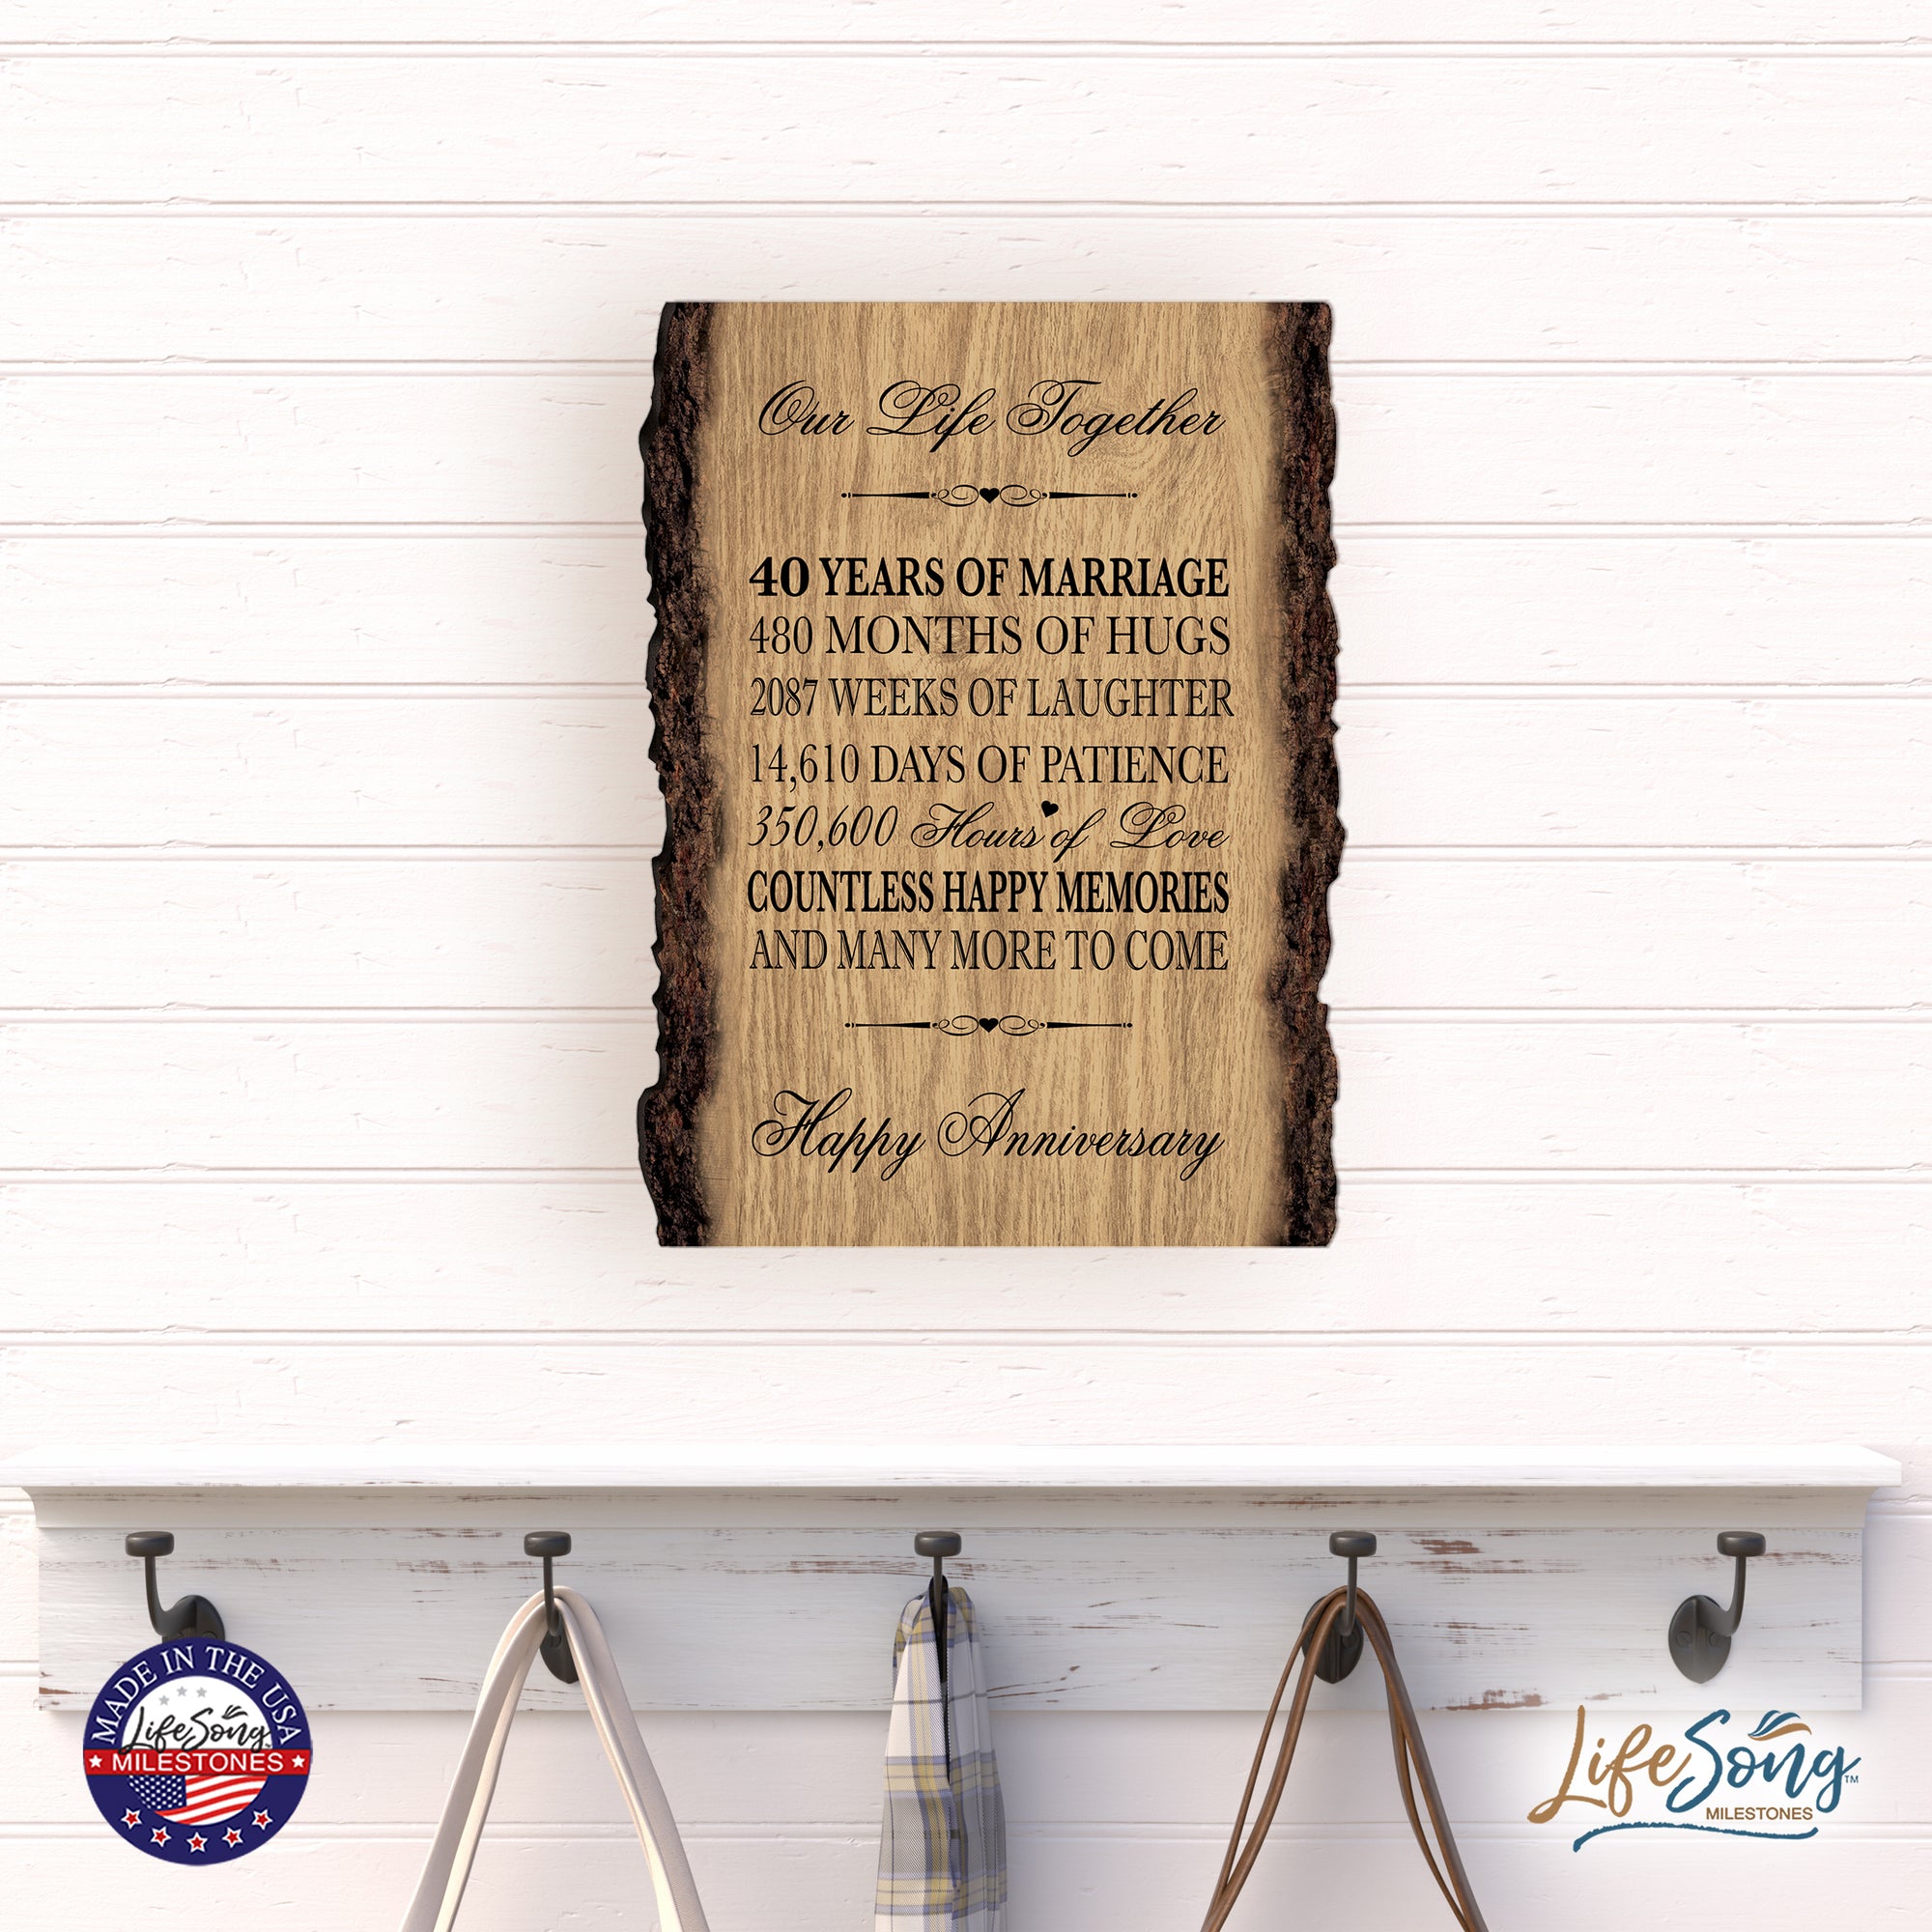 Rustic Wedding Anniversary 9x12 Barky Wall Plaque Gift For Parents, Grandparents New Couple - 40 Years Of Marriage